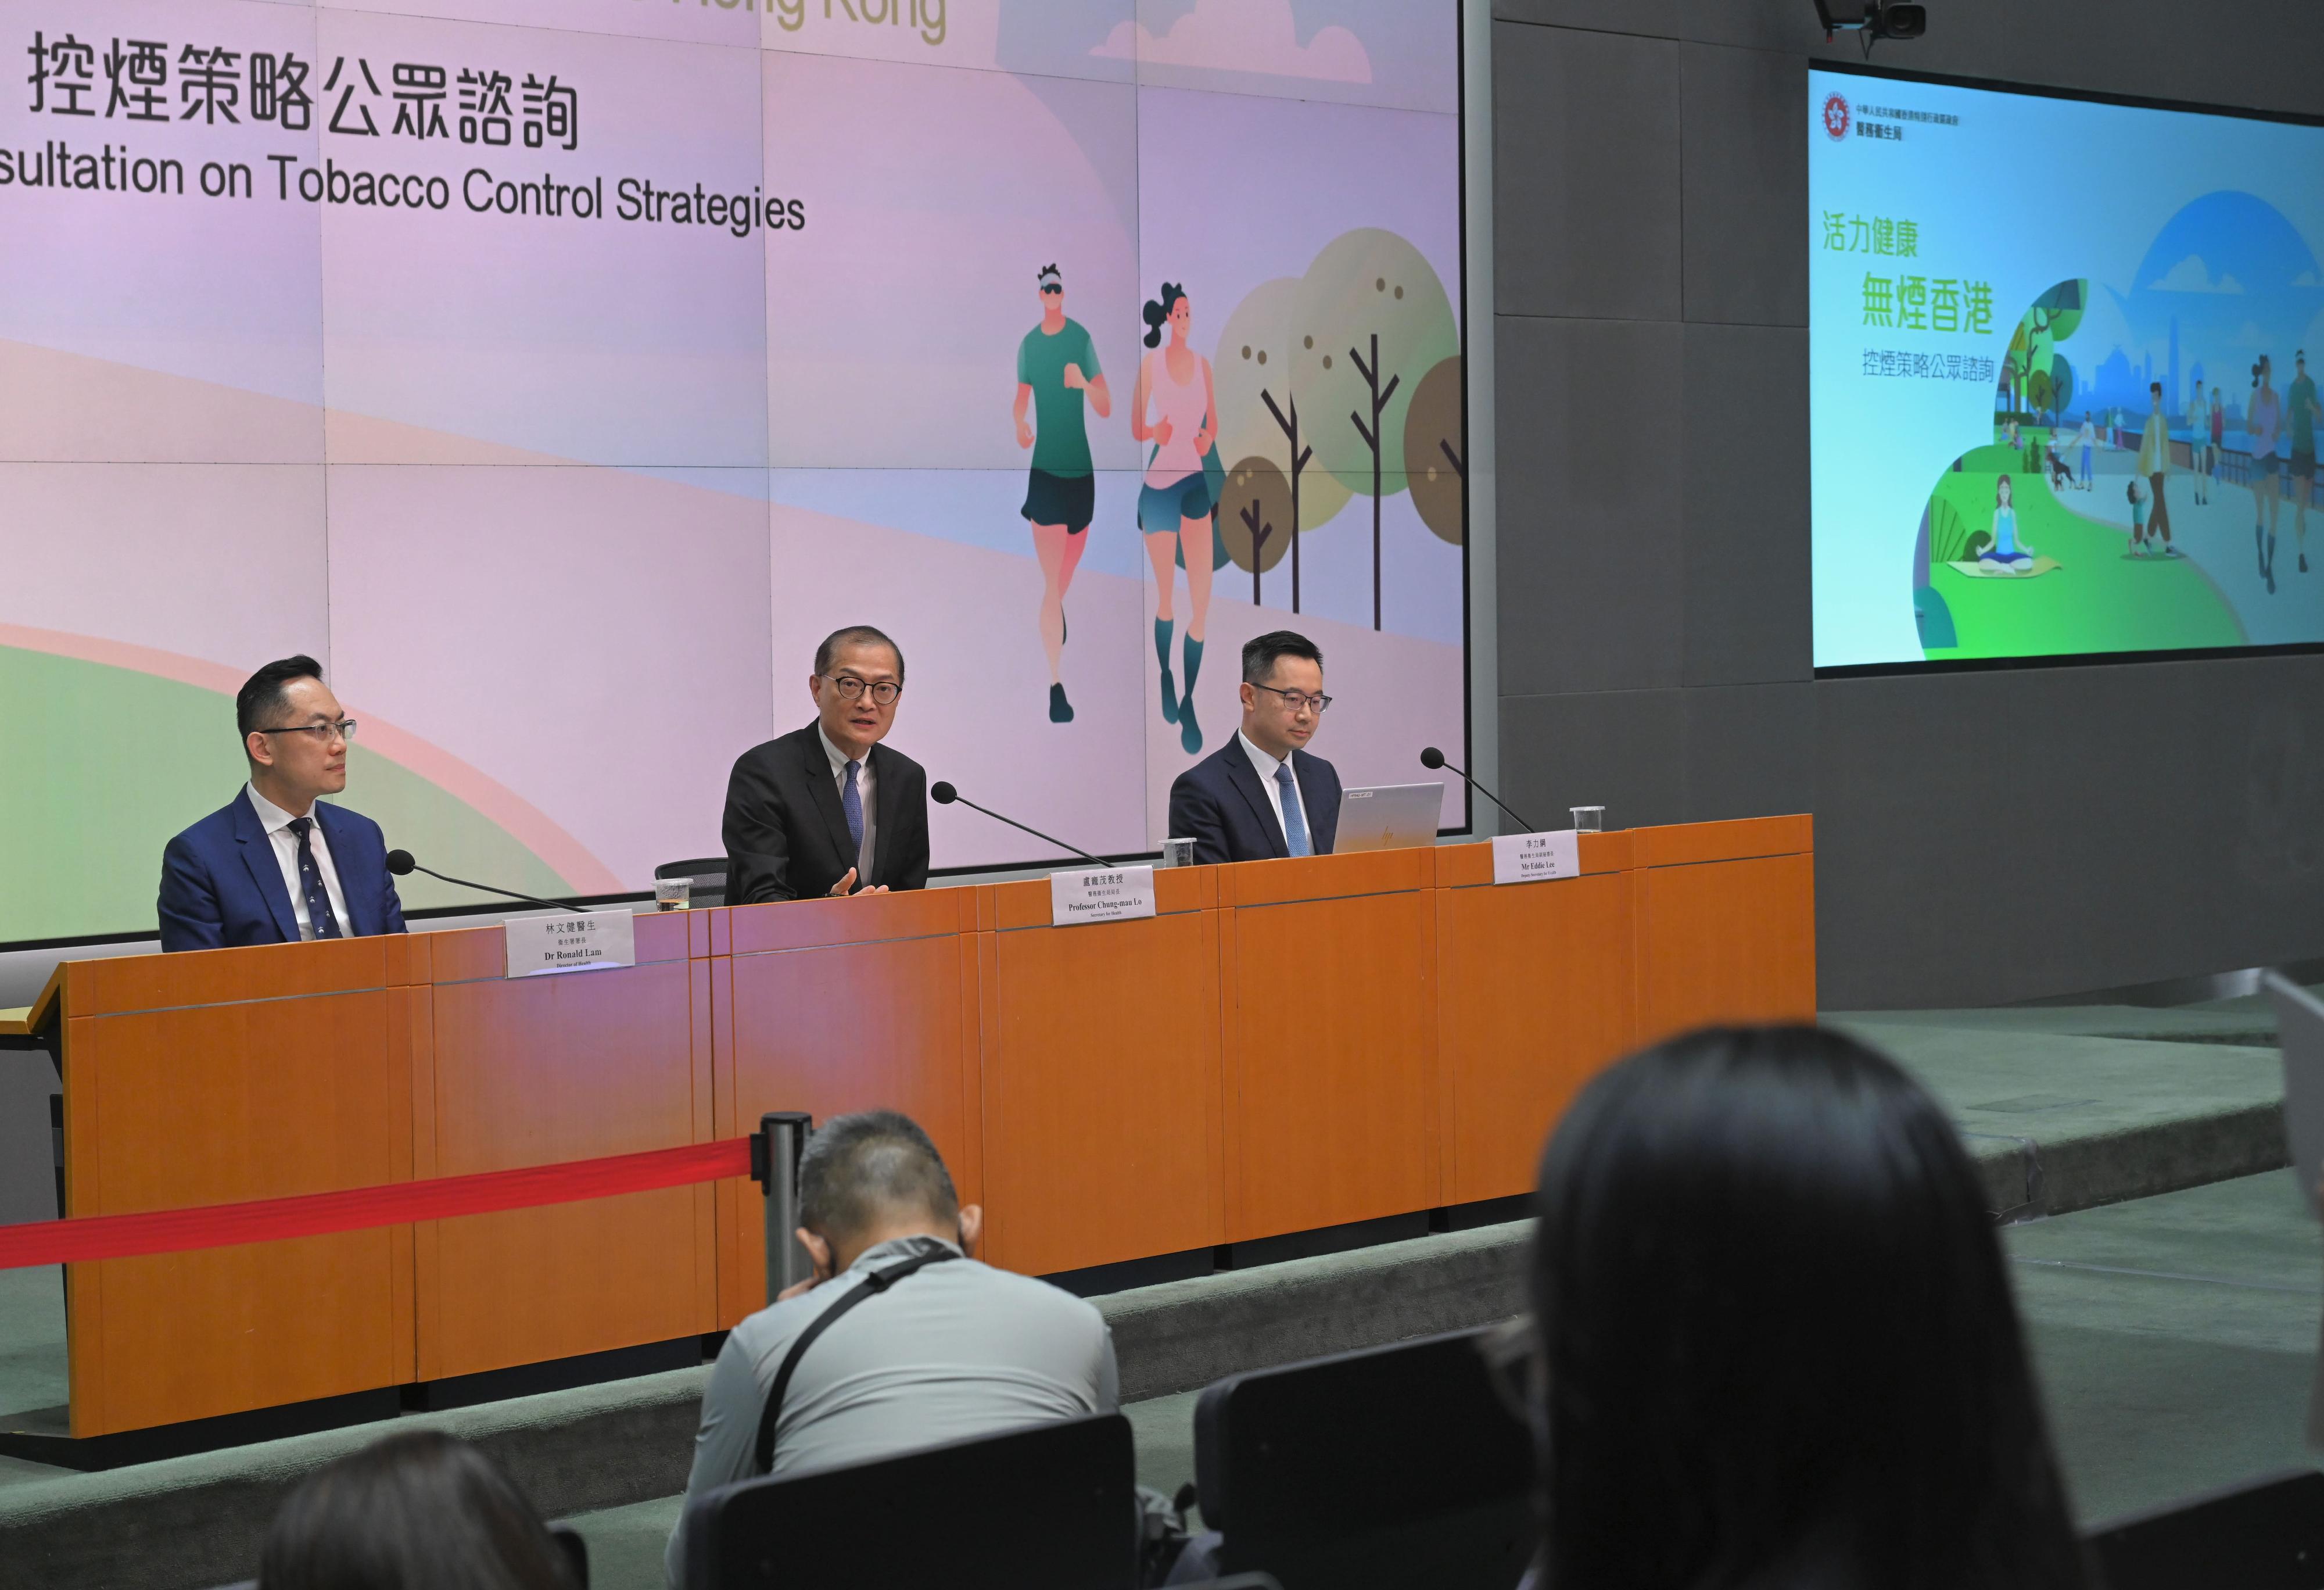 The Health Bureau today (July 12) launched the Vibrant, Healthy and Tobacco-free Hong Kong public consultation on tobacco control strategies. The Secretary for Health, Professor Lo Chung-mau (centre); the Director of Health, Dr Ronald Lam (left); and Deputy Secretary for Health Mr Eddie Lee (right), invited members of the public to express their views on the tobacco control work for the next phase at a press conference.